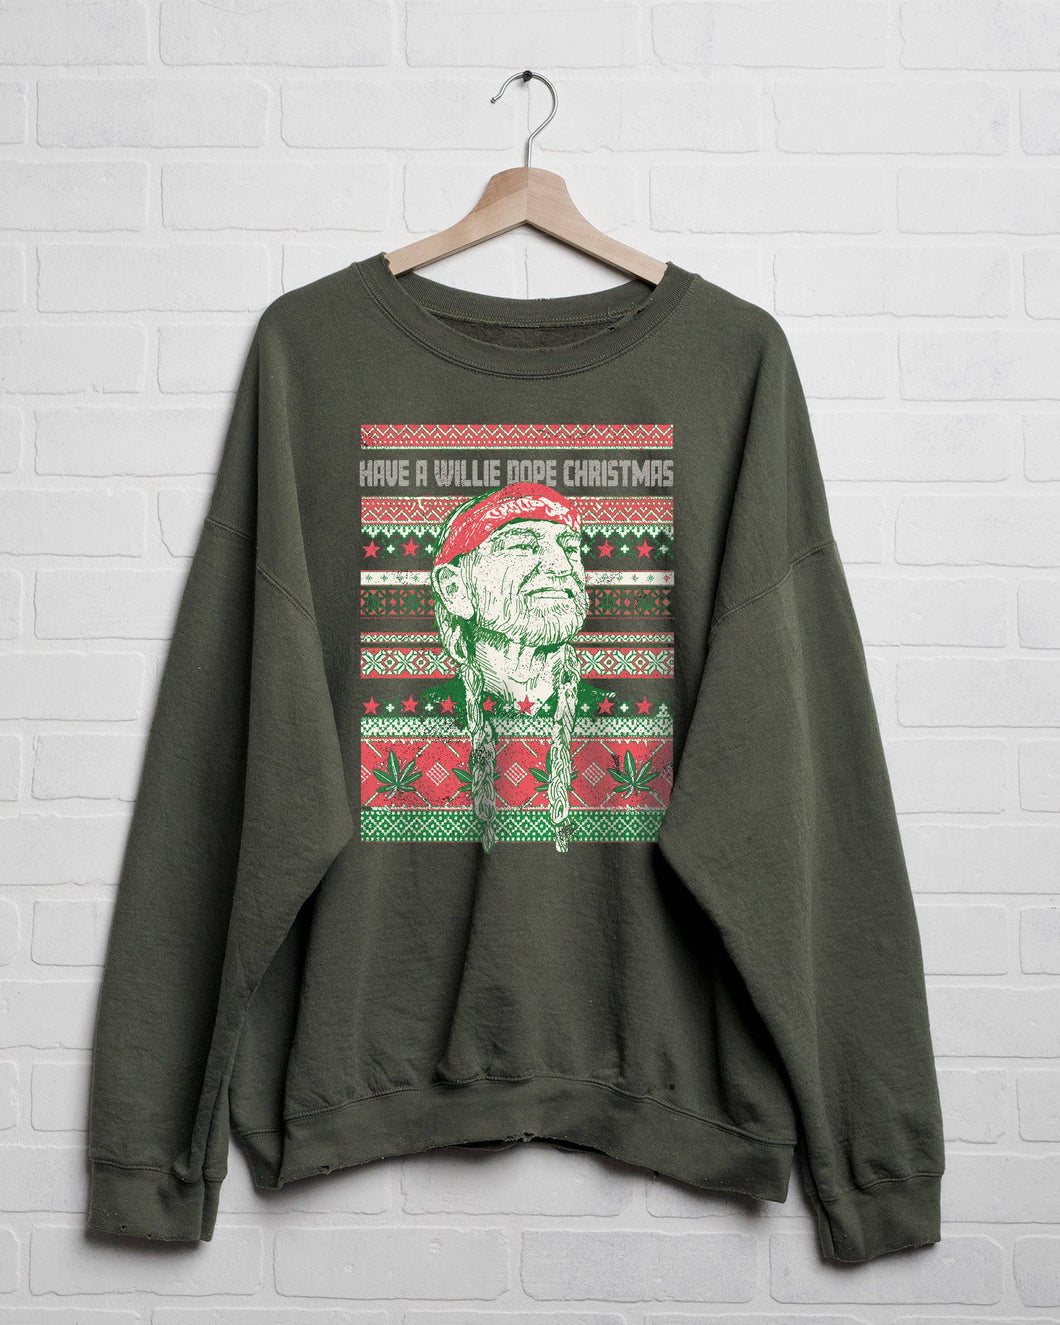 Have a Willie Dope Christmas Sweatshirt